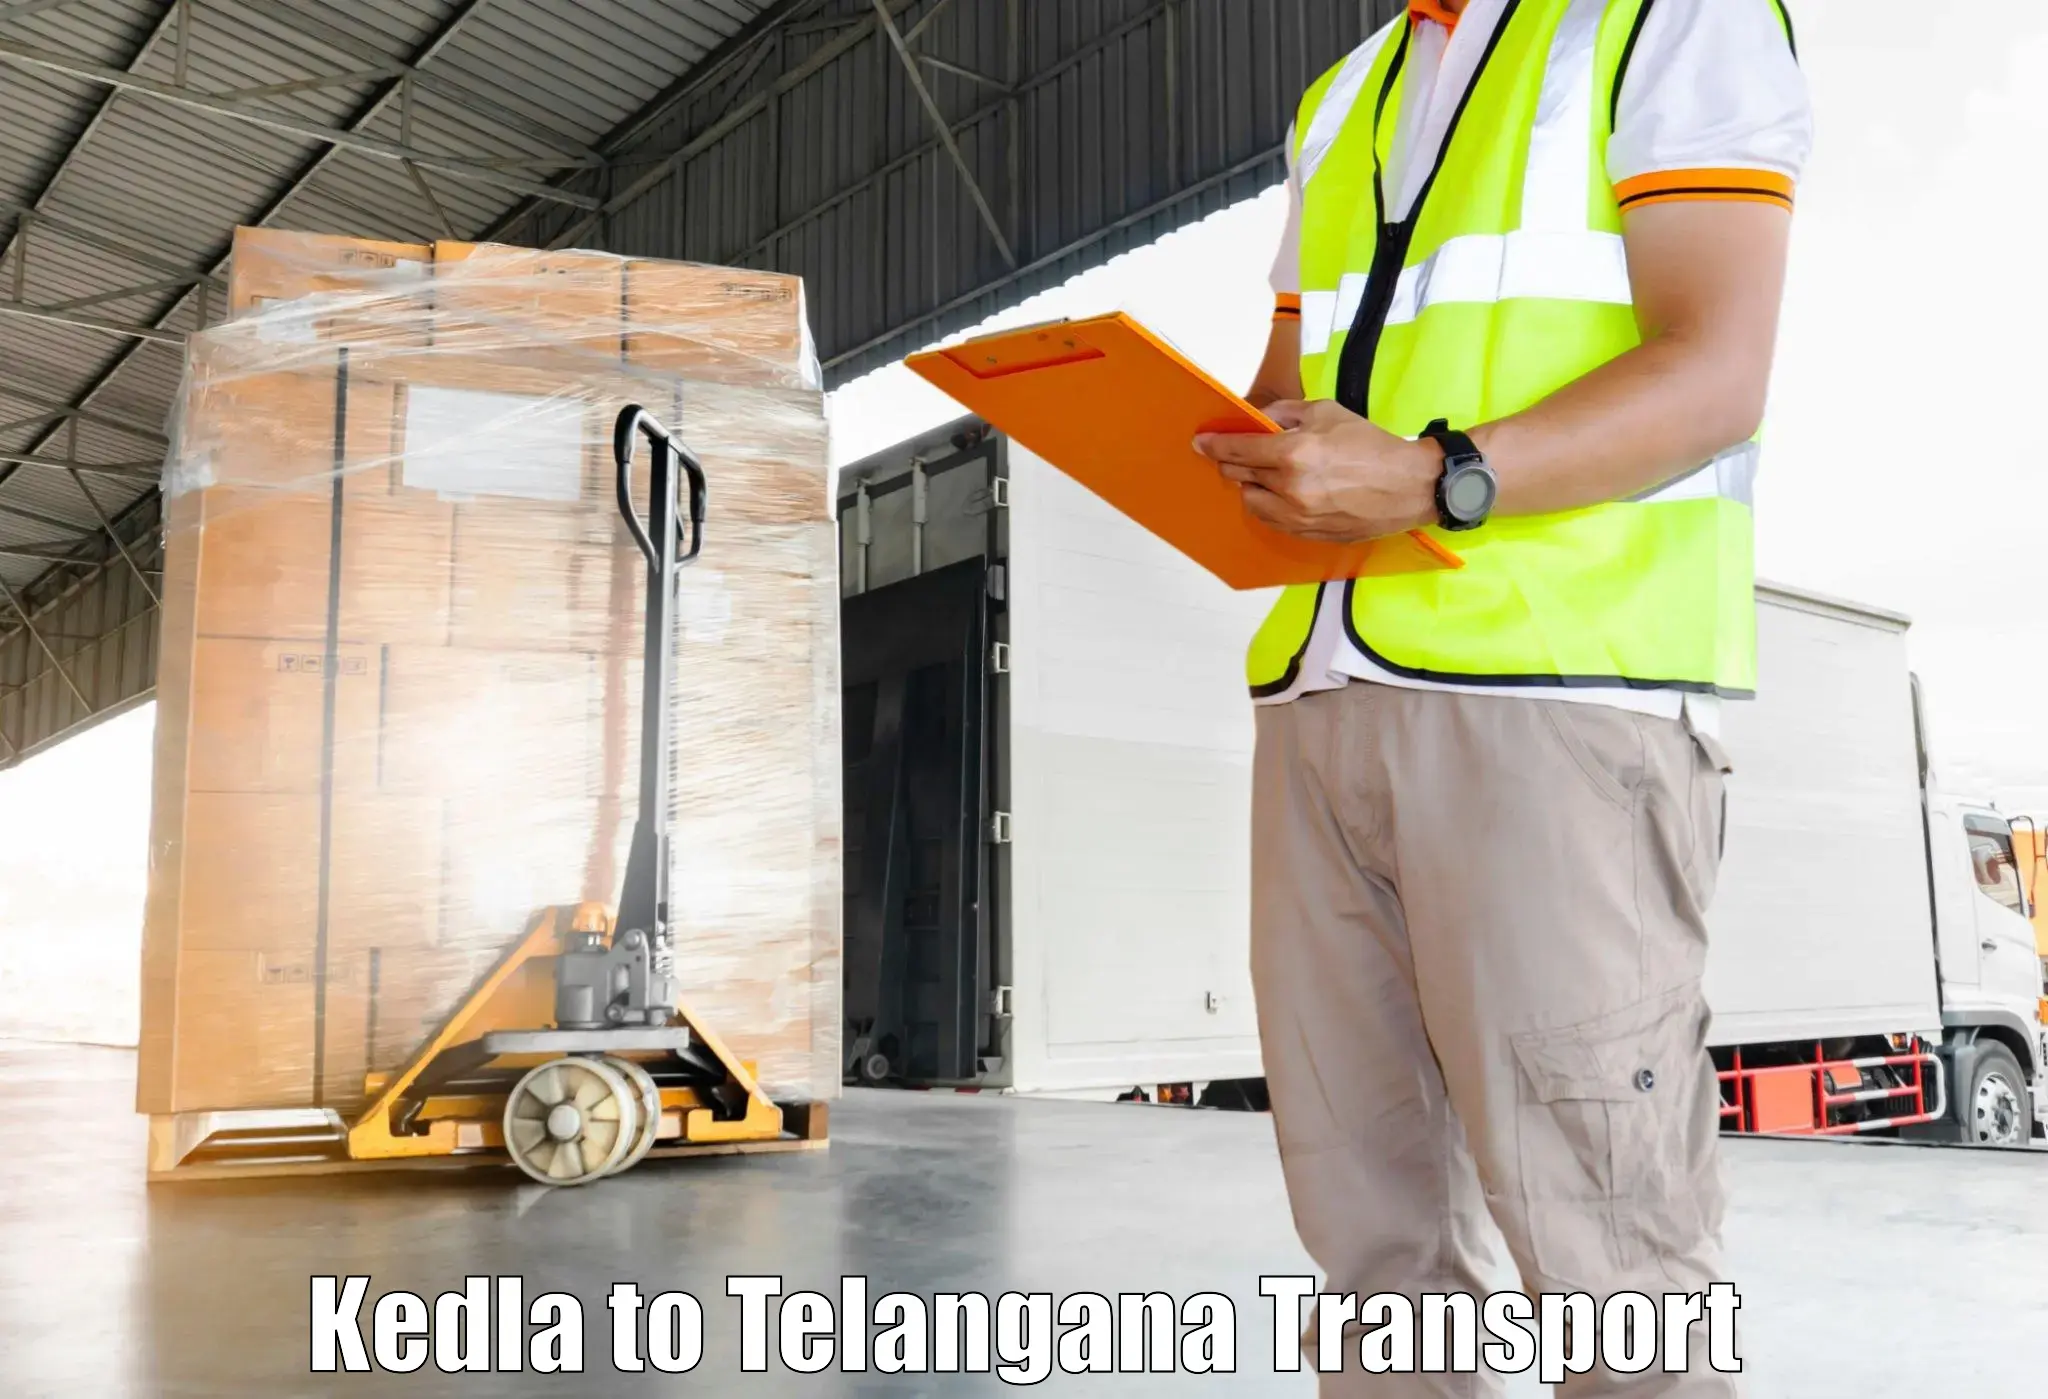 Best transport services in India Kedla to Manopad